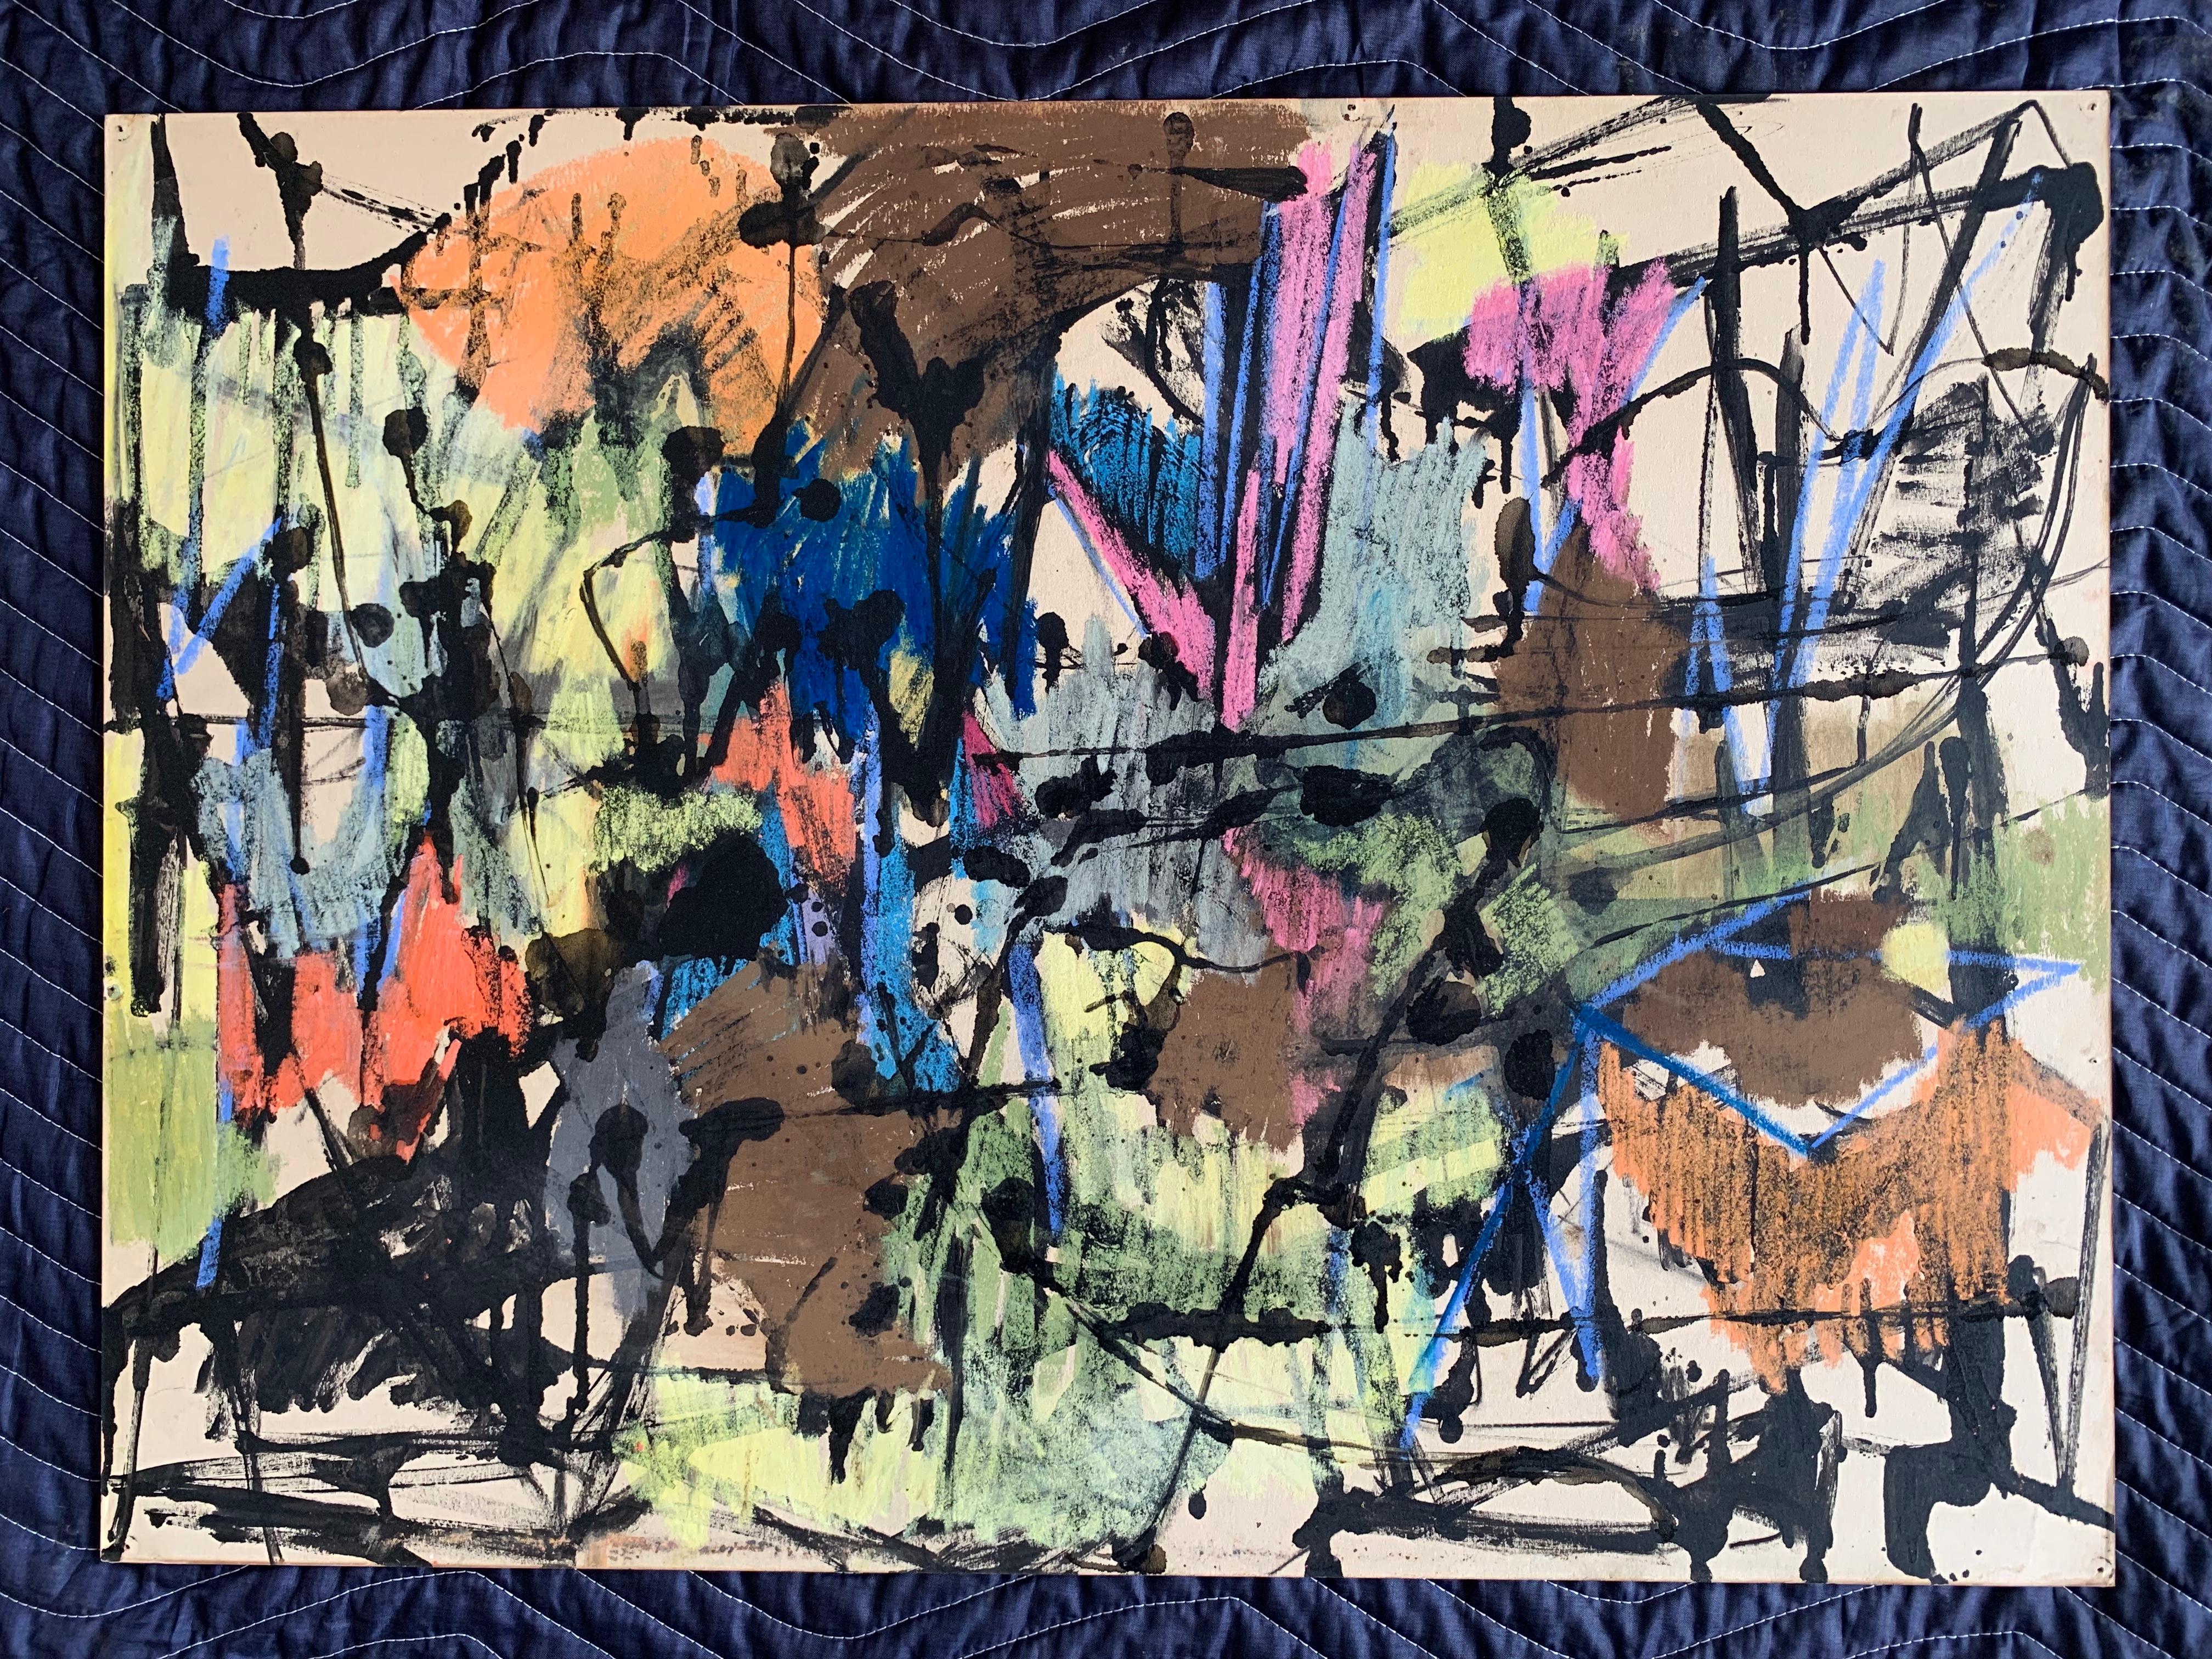 A fantastic and beautiful Esteban Vicente abstract expressionist drawing from the late 1950s. Exhibited at Leo Castelli (4 E.77th st. Gallery). Purchased from an artist friend of Vicente. A note about the artist: Vicente had his first one-man